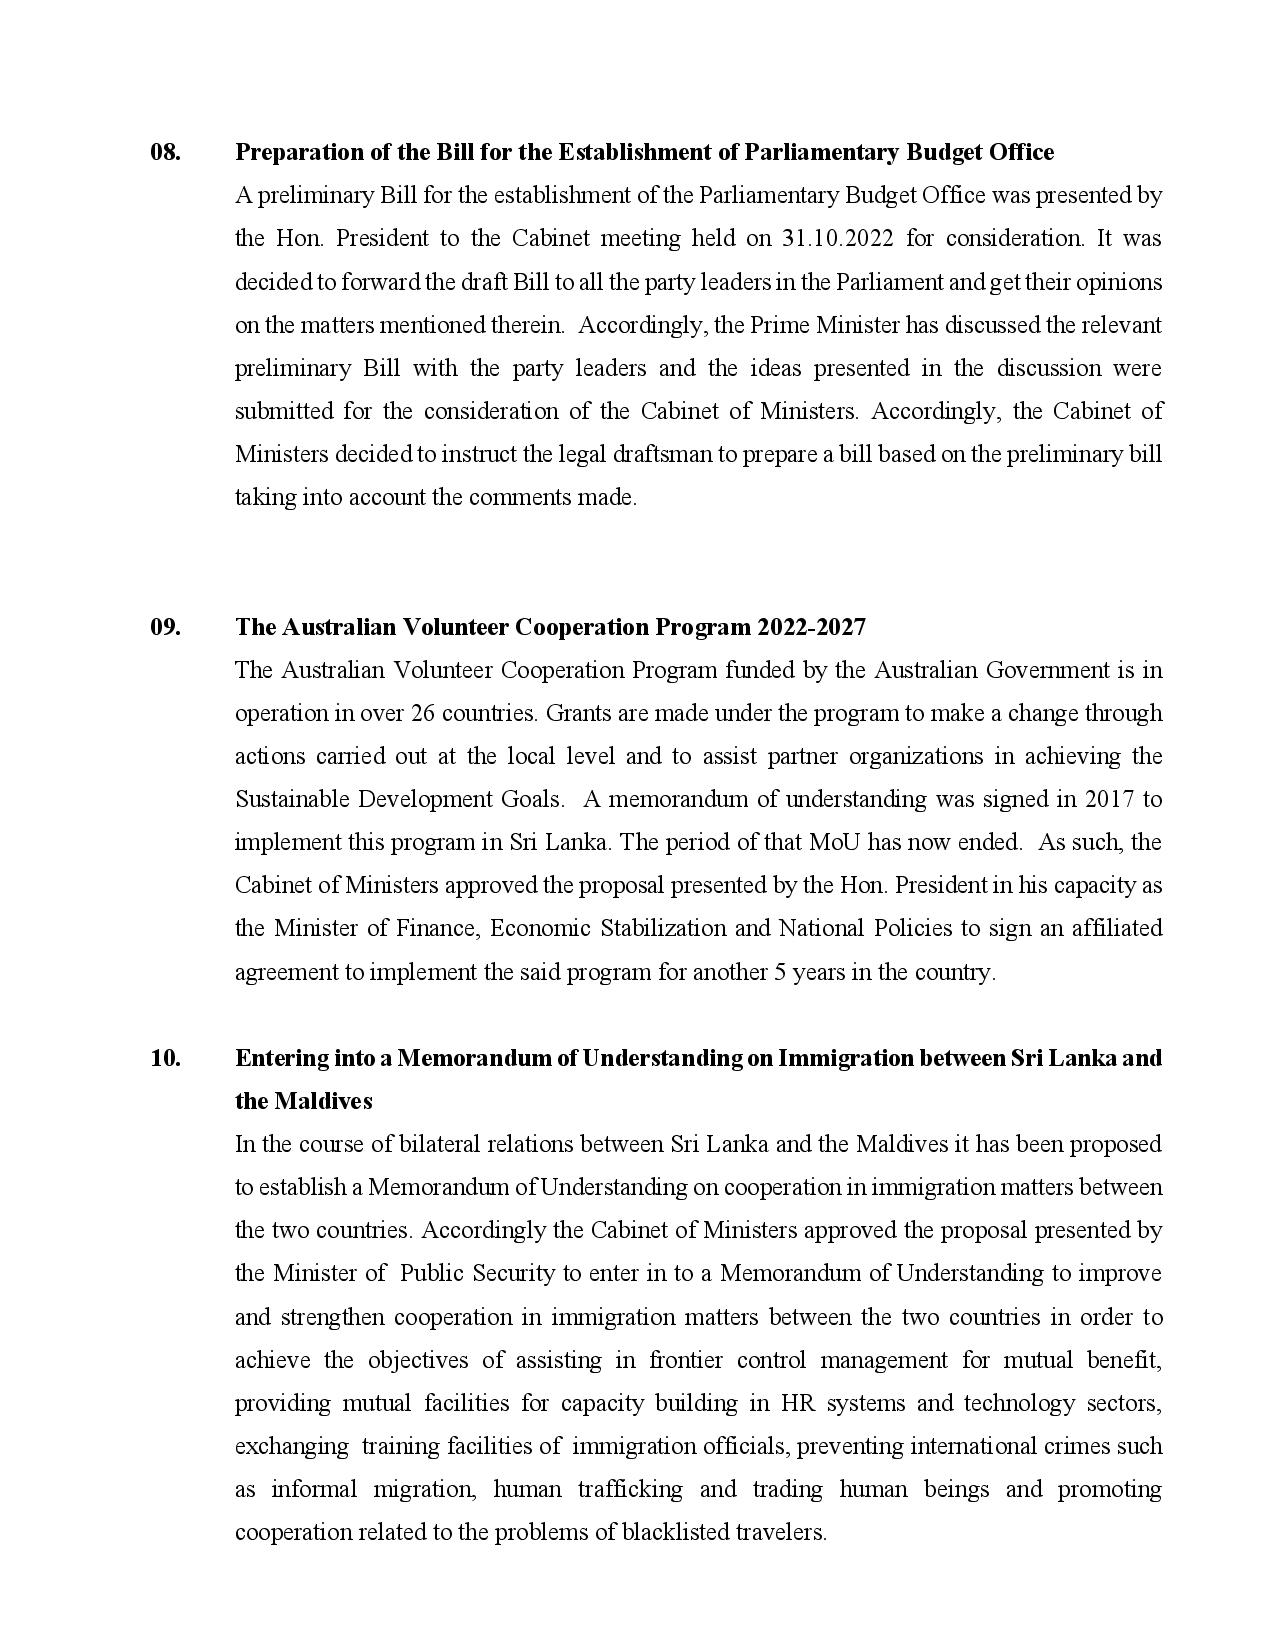 Cabinet Decisiion on 05.12.2022 English page 004